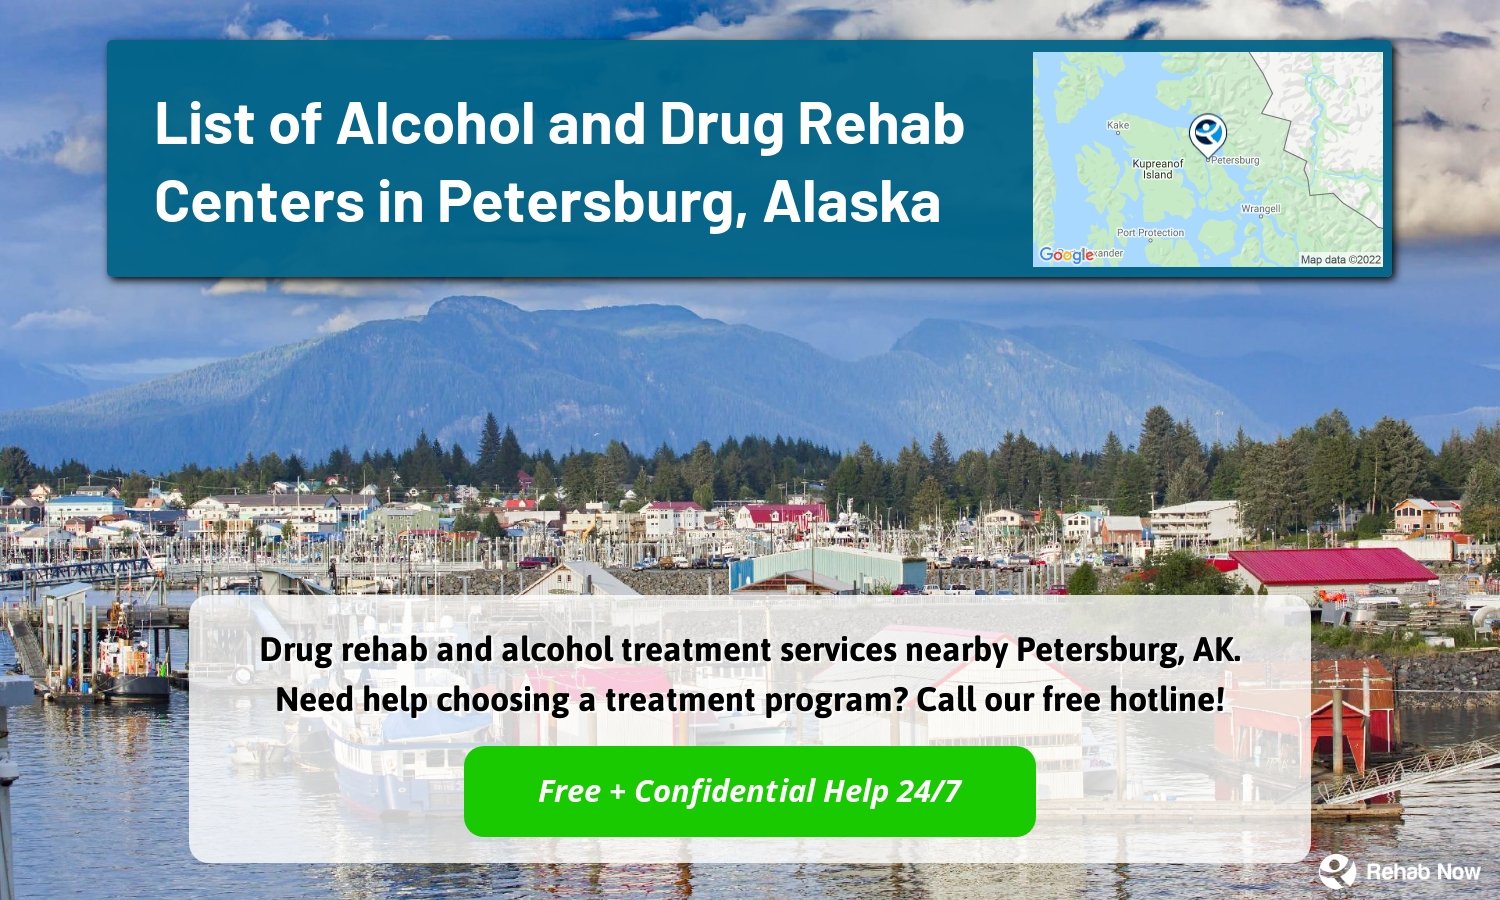 Drug rehab and alcohol treatment services nearby Petersburg, AK. Need help choosing a treatment program? Call our free hotline!